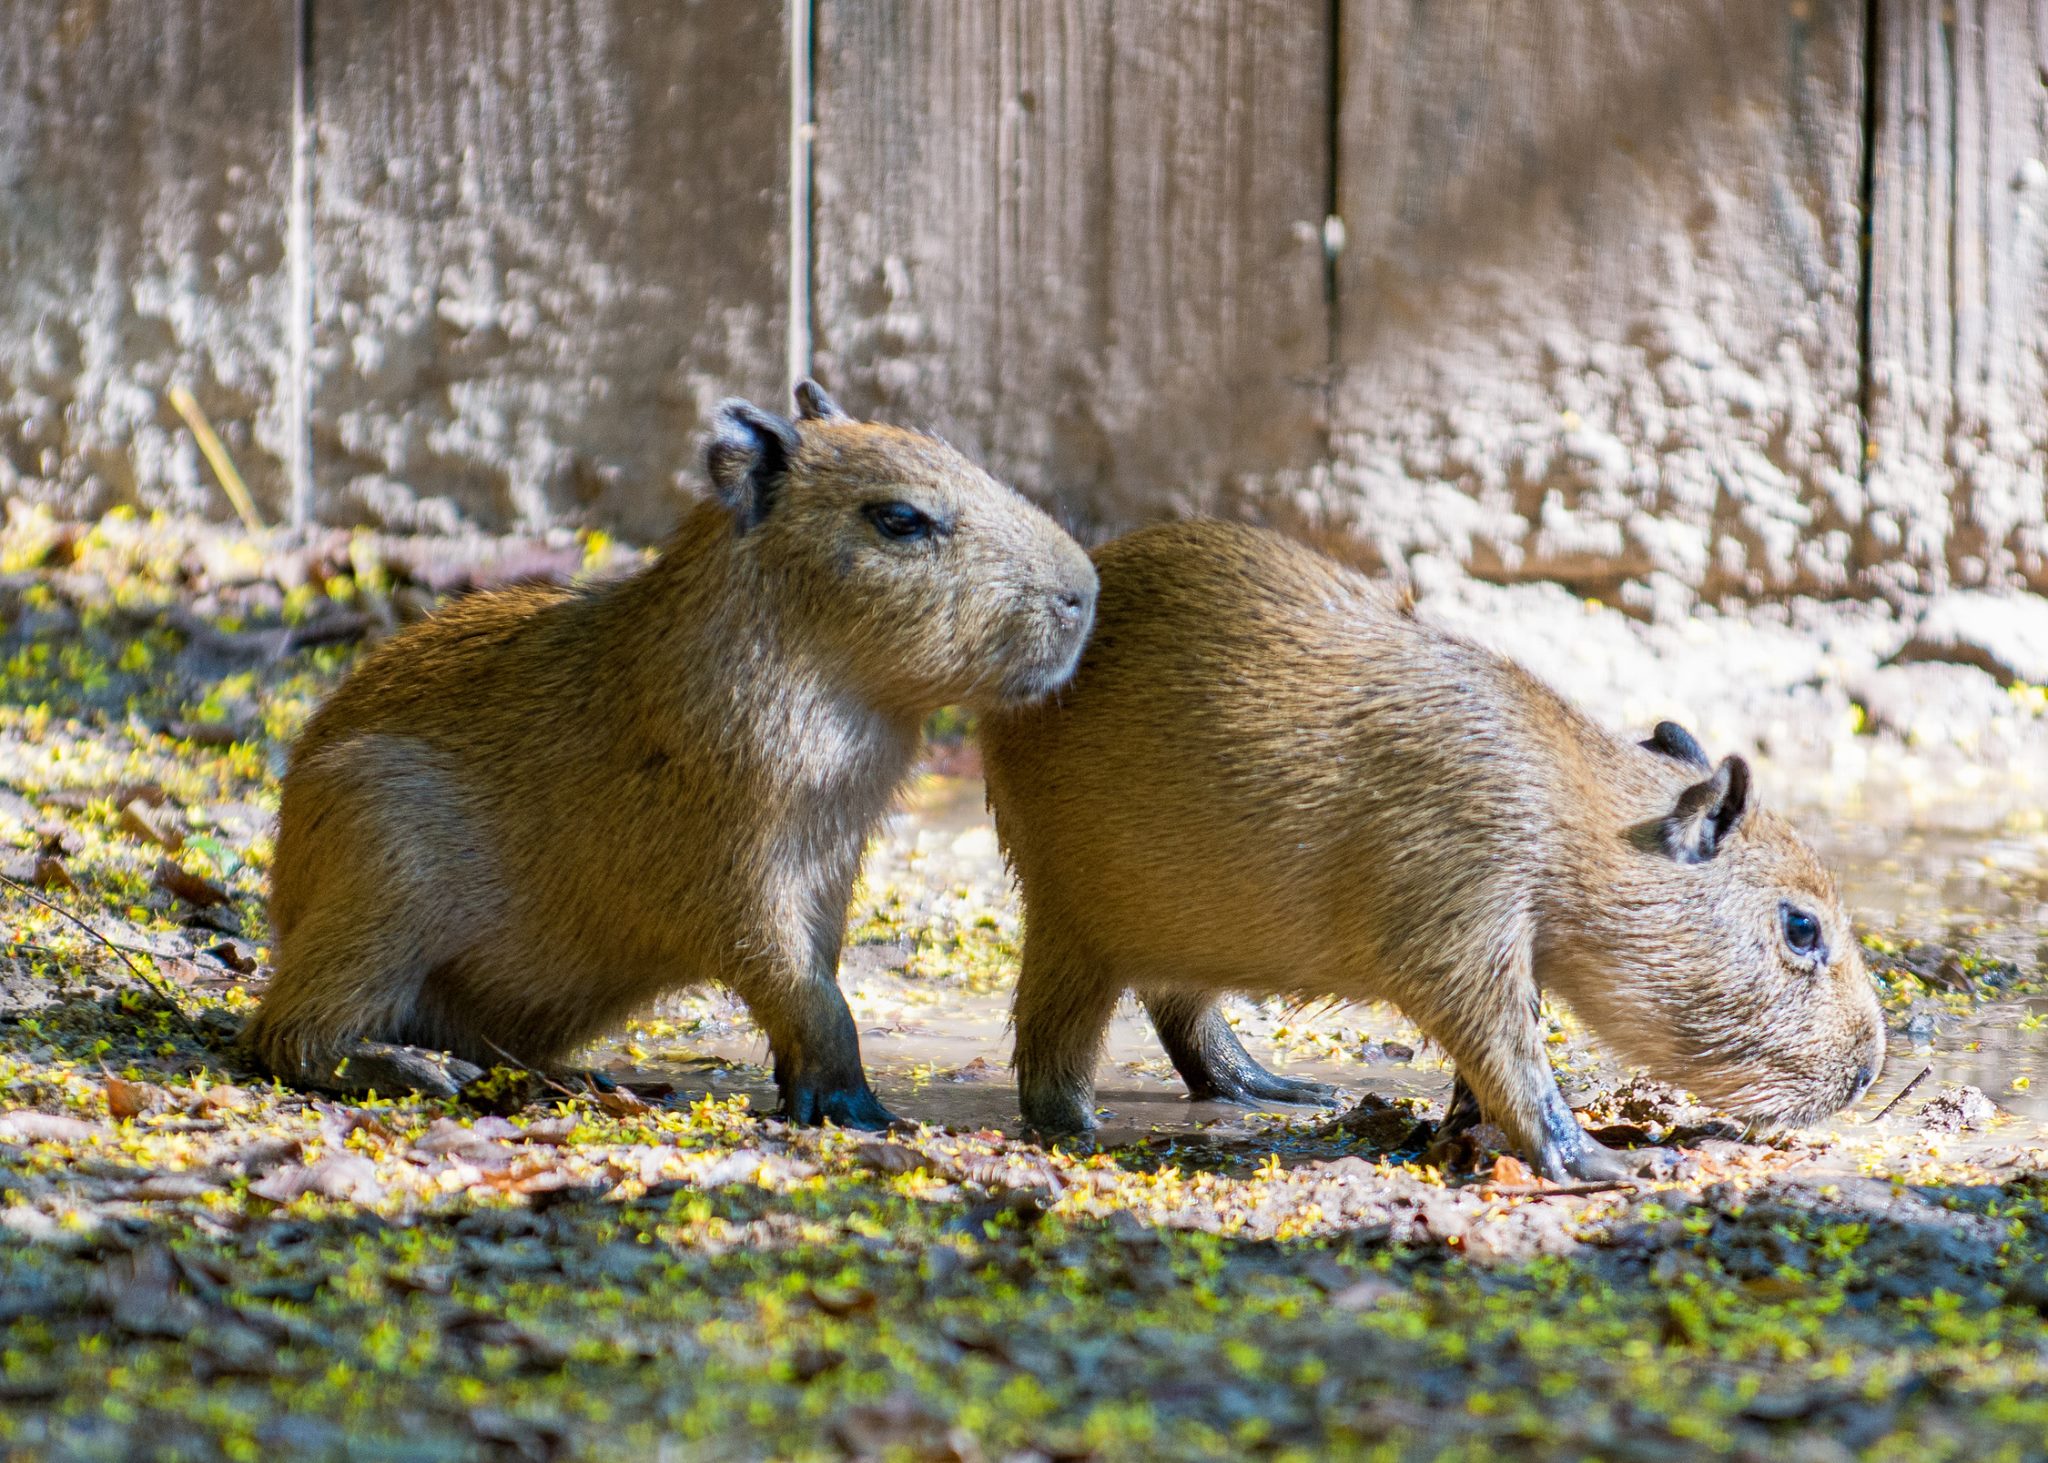 World's largest rodents at Houston Zoo